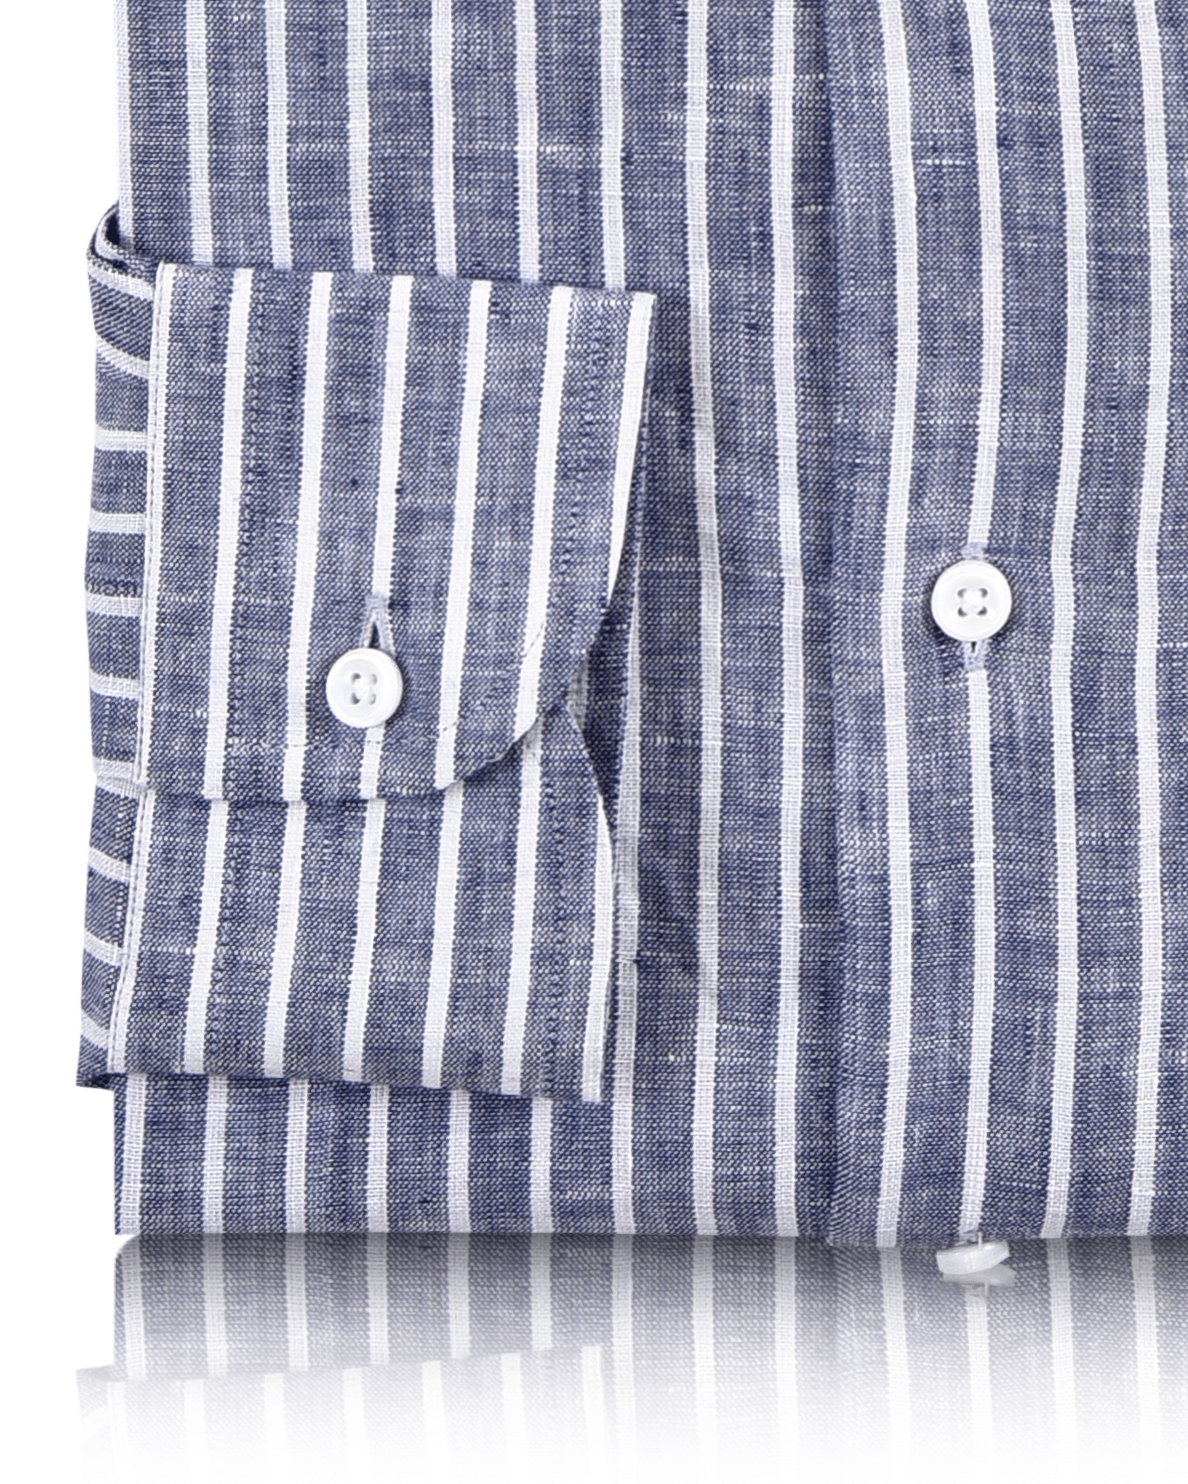 Cuff of custom linen shirt for men in blue chambray with white stripes